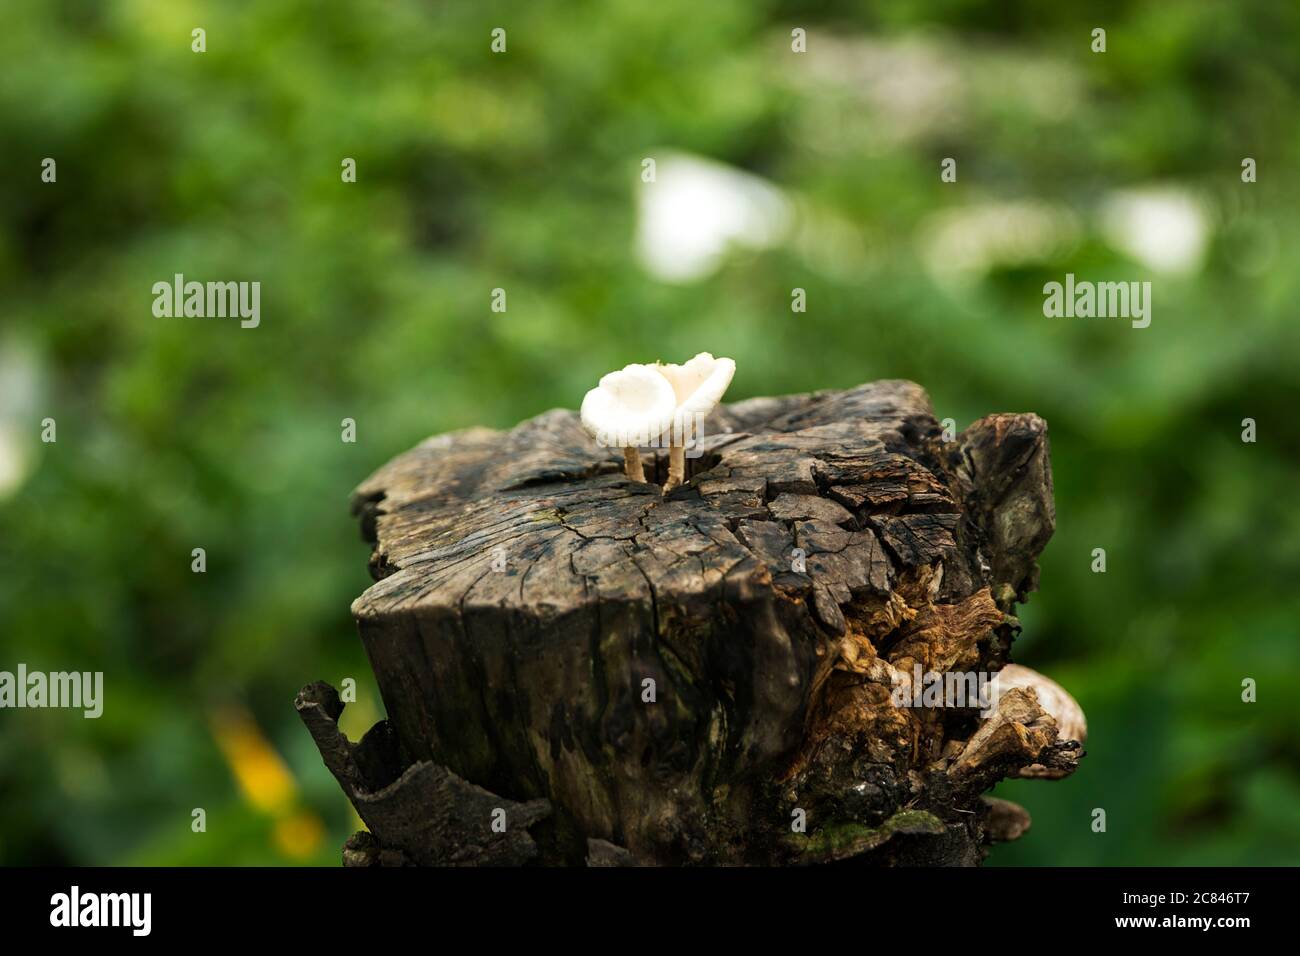 Trunk of wood on the background Stock Photo